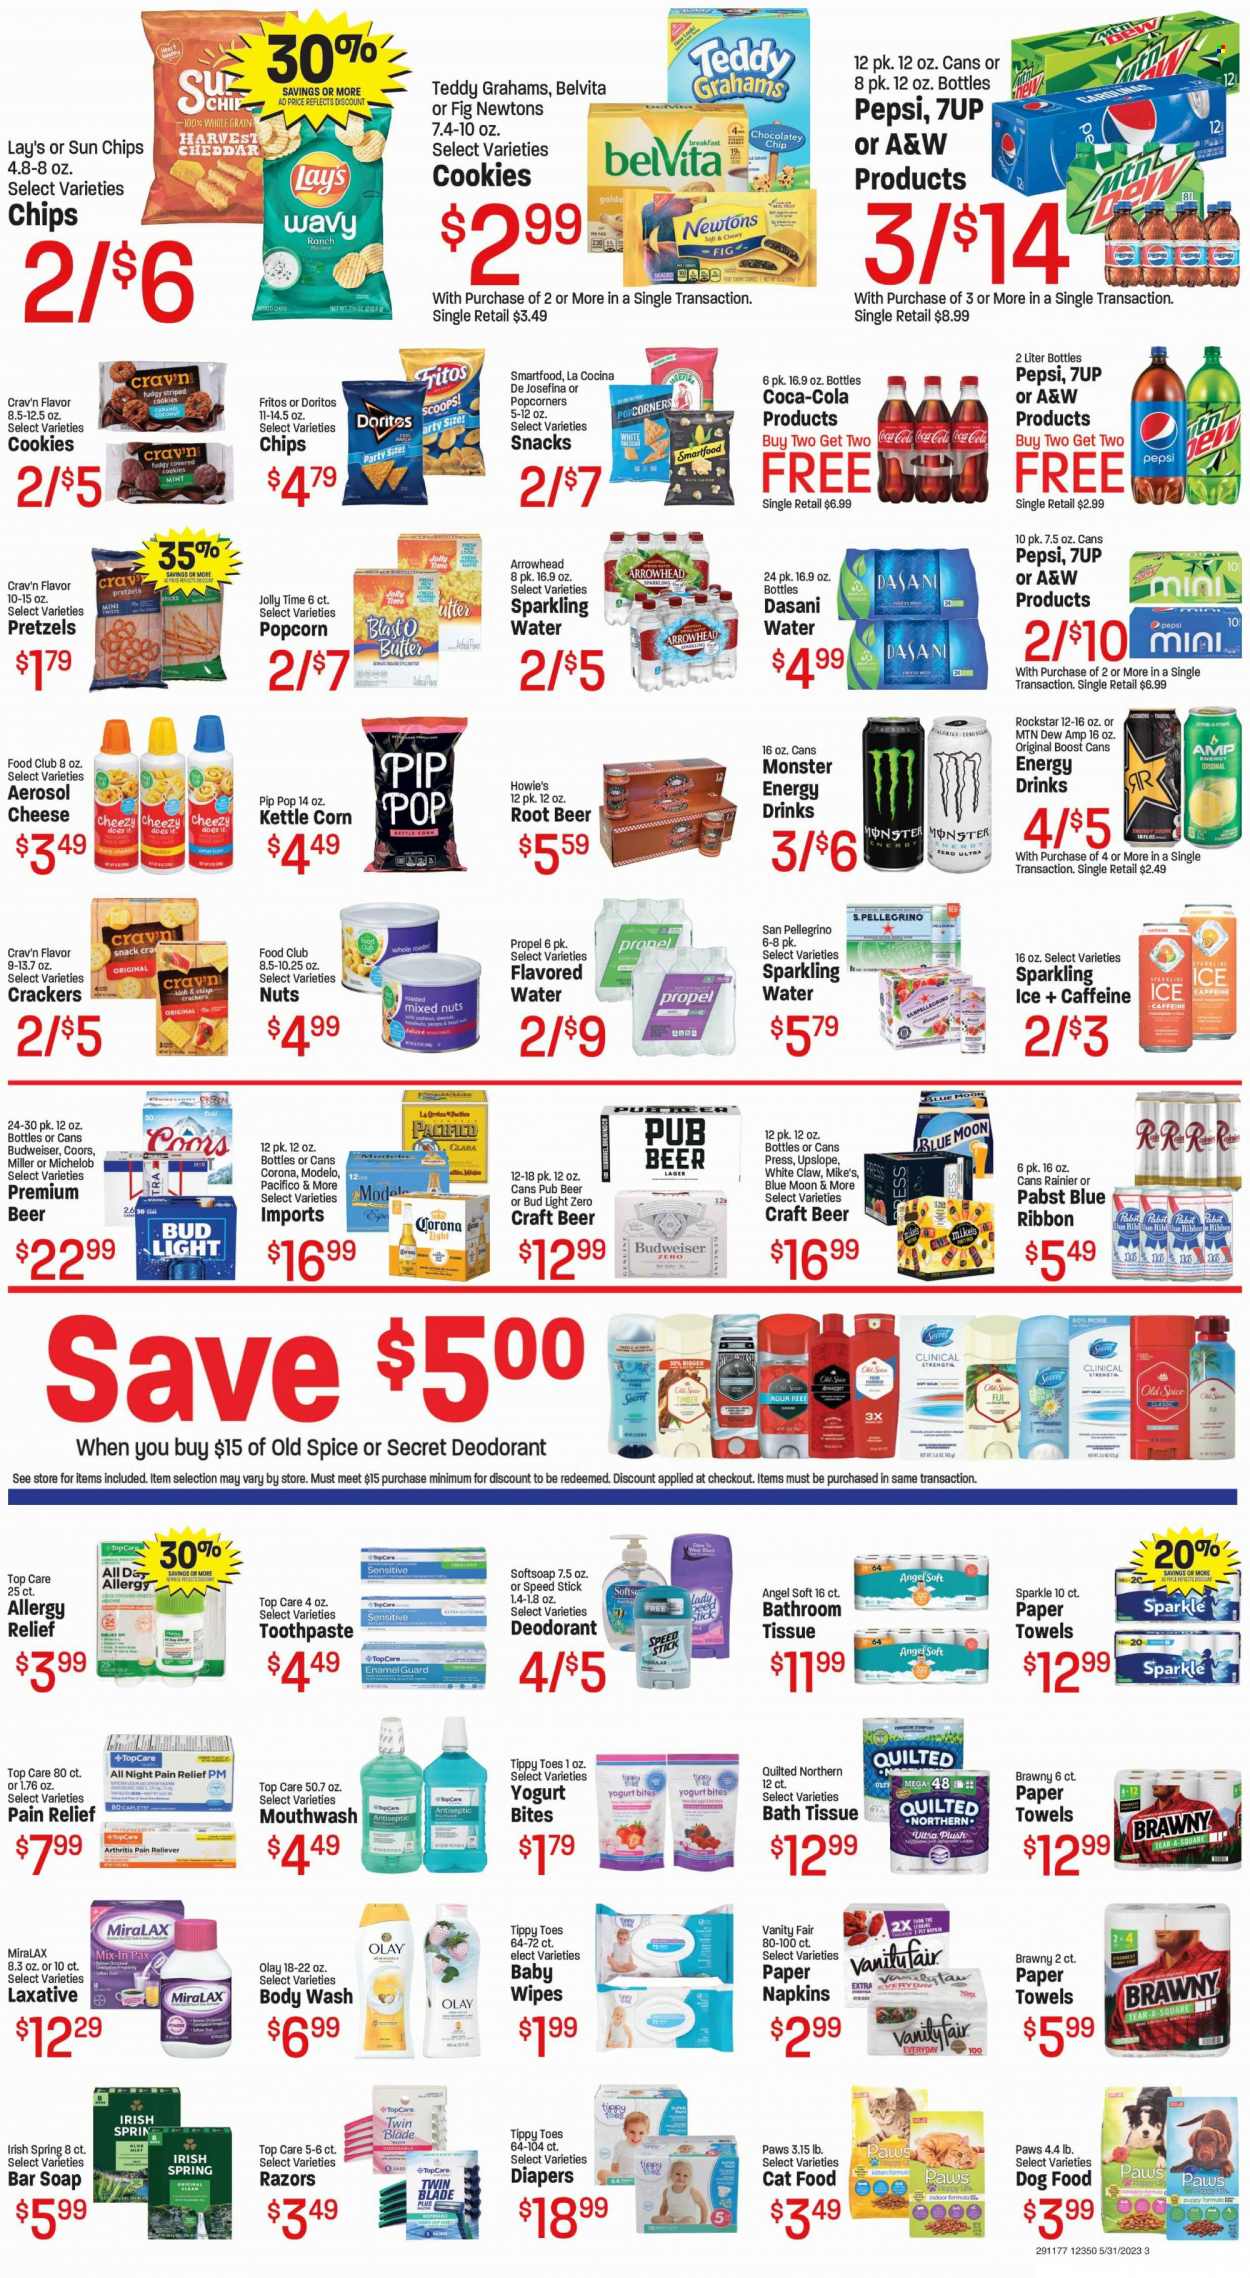 thumbnail - Fresh Market Flyer - 05/31/2023 - 06/06/2023 - Sales products - pretzels, snack, cheese, cookies, crackers, Doritos, Fritos, kettle corn, potato chips, chips, Lay’s, Smartfood, popcorn, salty snack, belVita, caramel, almonds, cashews, hazelnuts, mixed nuts, Coca-Cola, Mountain Dew, Pepsi, energy drink, Monster, soft drink, 7UP, Monster Energy, A&W, Rockstar, flavored water, sparkling water, San Pellegrino, water, Boost, alcohol, White Claw, beer, Bud Light, Corona Extra, Miller, Lager, Modelo, Pabst Blue Ribbon, Pabst, wipes, baby wipes, napkins, nappies, bath tissue, Quilted Northern, kitchen towels, paper towels, body wash, Softsoap, Old Spice, soap bar, soap, toothpaste, mouthwash, Olay, anti-perspirant, Speed Stick, deodorant, razor, Paws, animal food, cat food, dog food, MiraLAX, pain relief, laxative, allergy relief, Budweiser, Coors, Blue Moon, Michelob. Page 3.